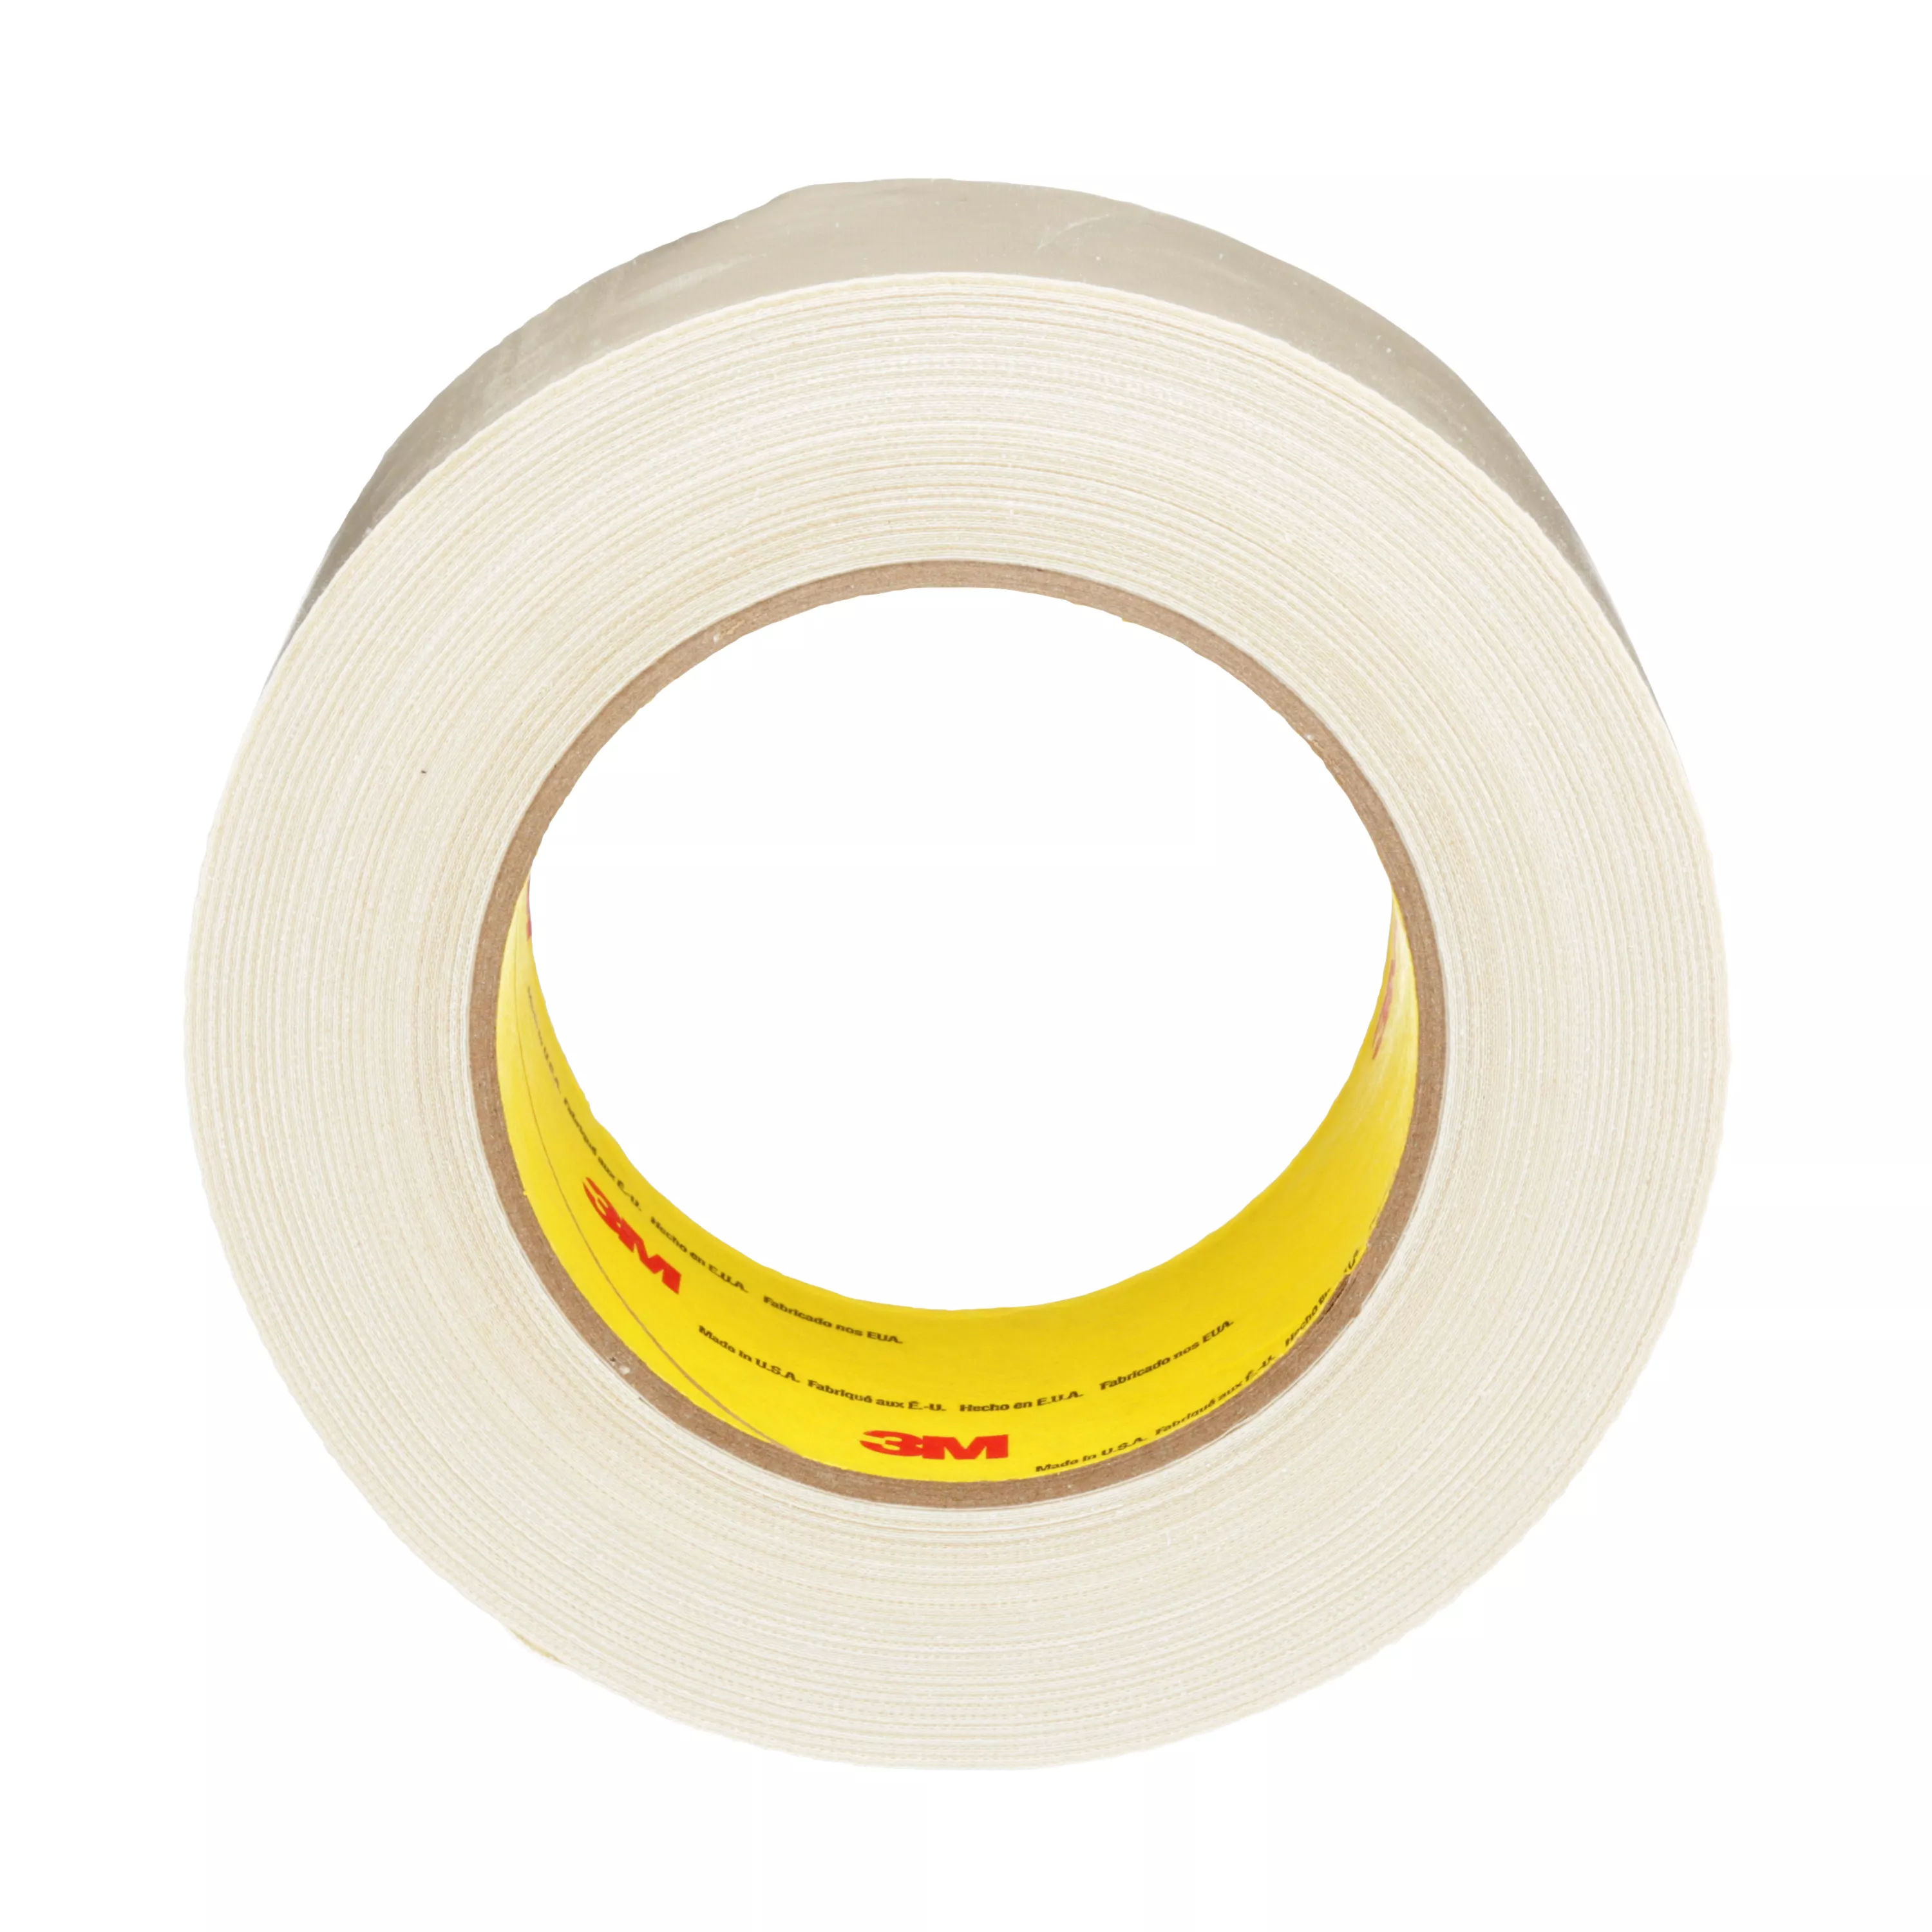 Product Number 5401 | 3M™ Traction Tape 5401